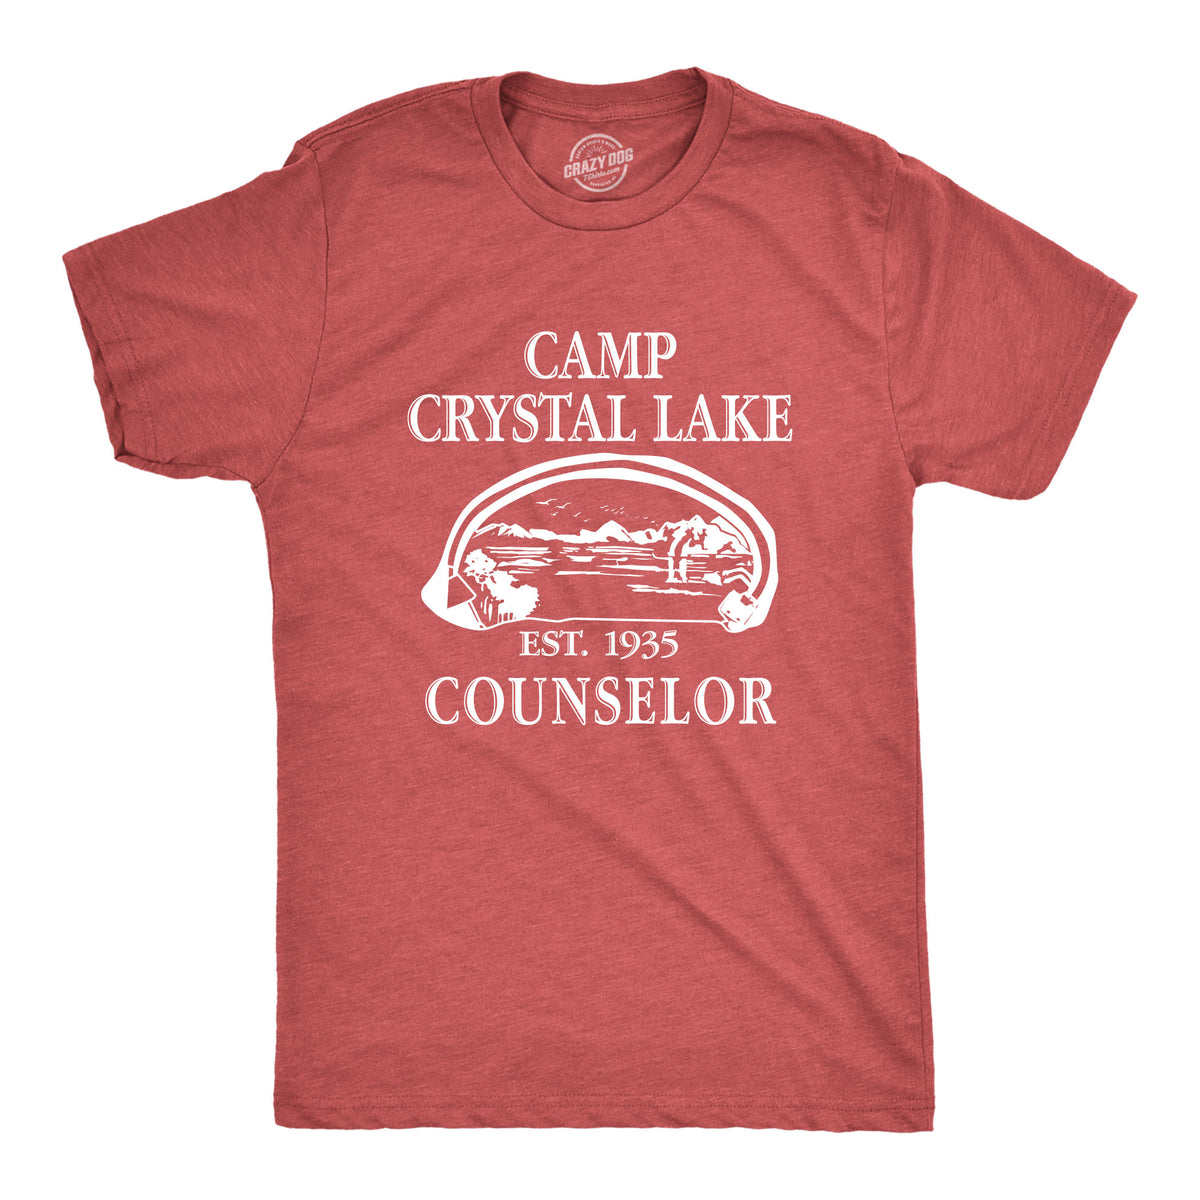 Funny Heather Red Camp Crystal Lake Mens T Shirt Nerdy Halloween TV &amp; Movies Camping Retro Tee